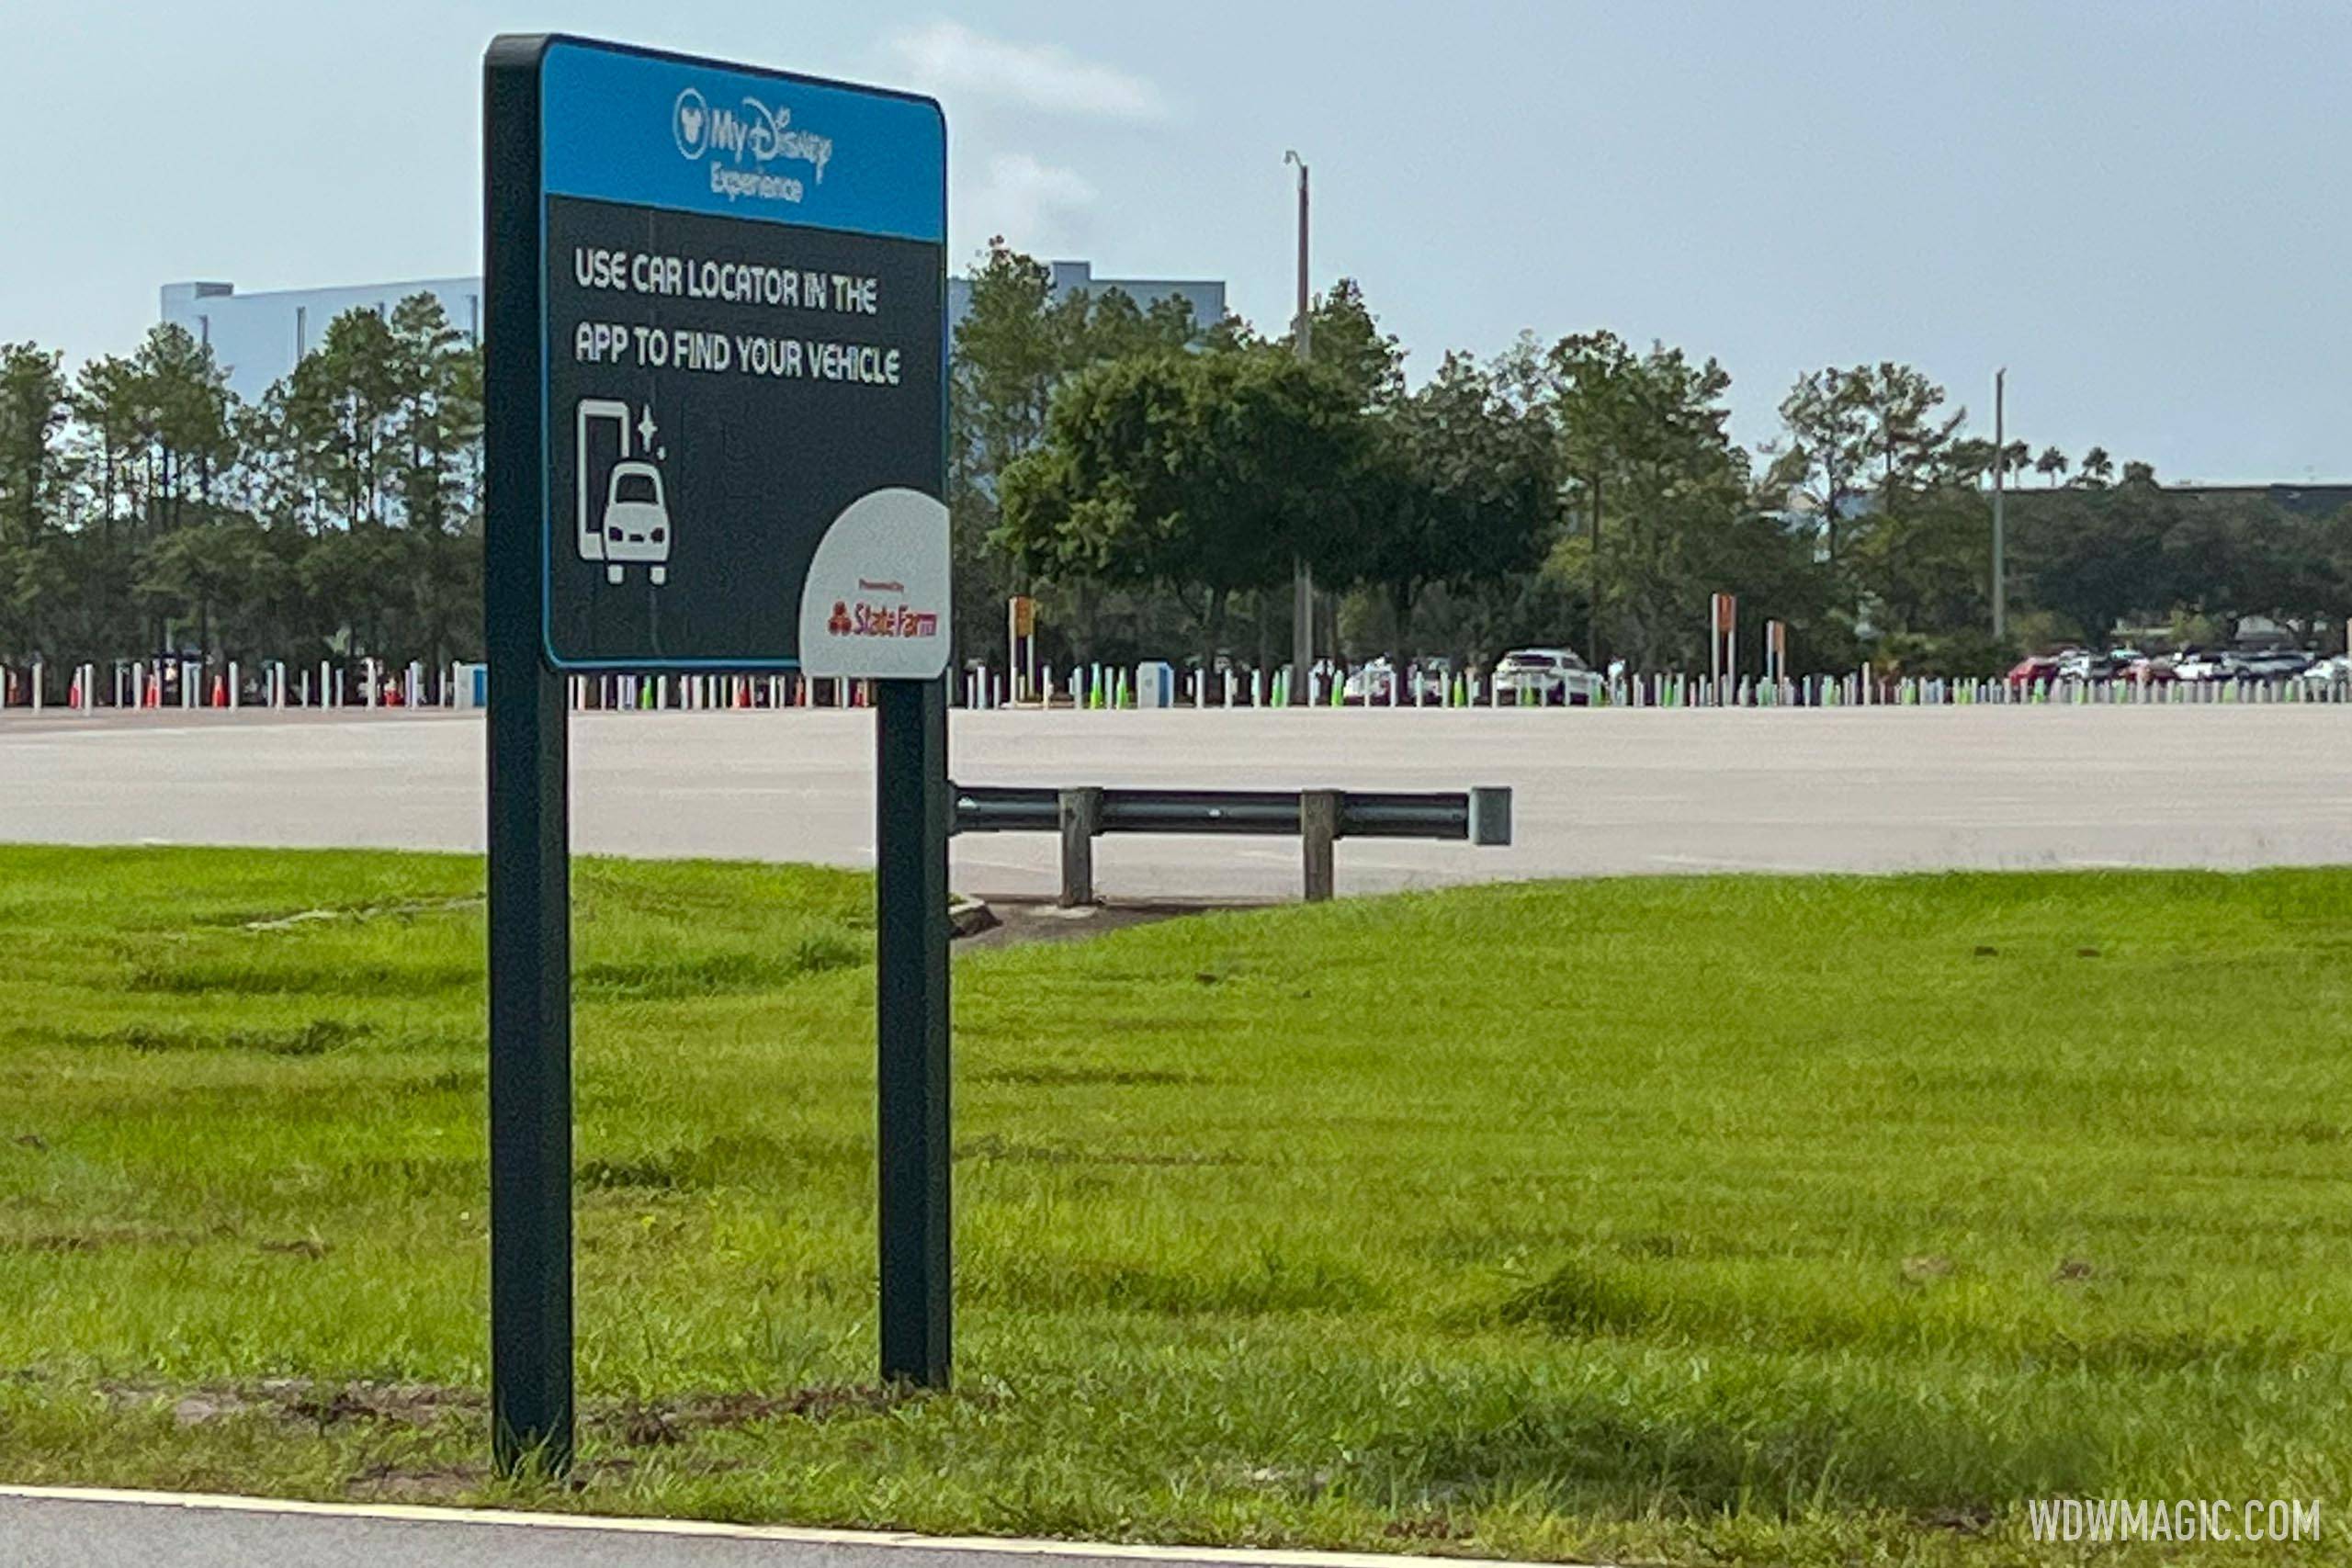 EPCOT parking lot resurfacing and upgrades - August 2022